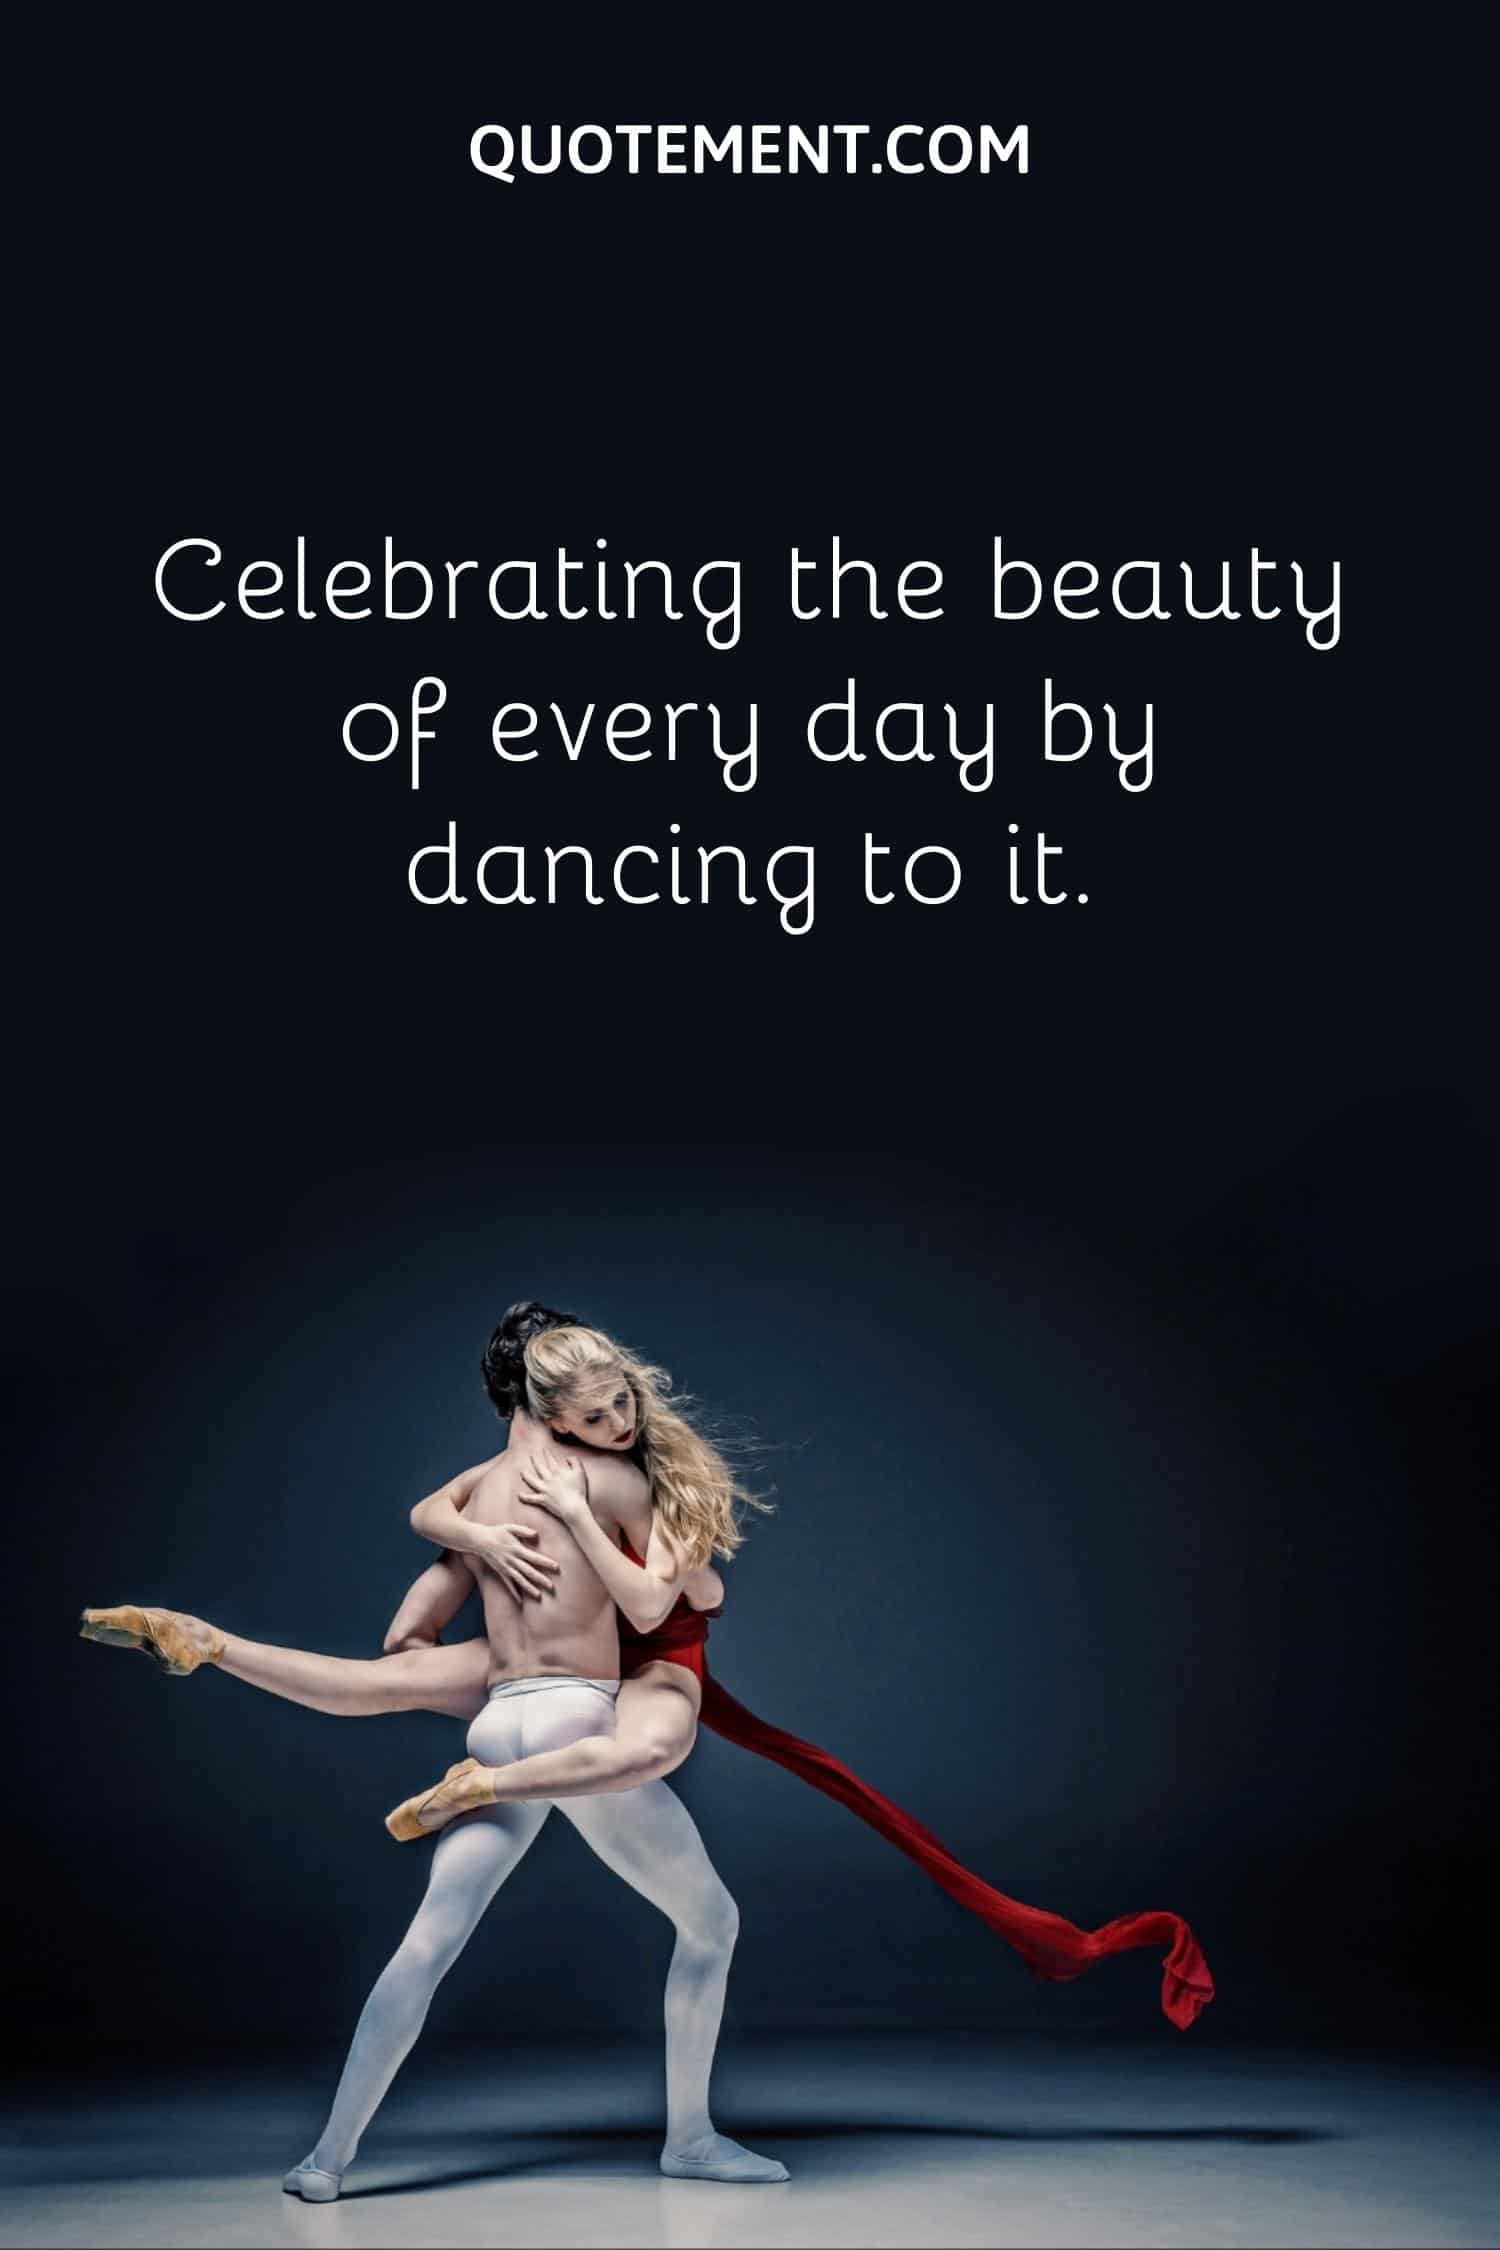 Celebrating the beauty of every day by dancing to it